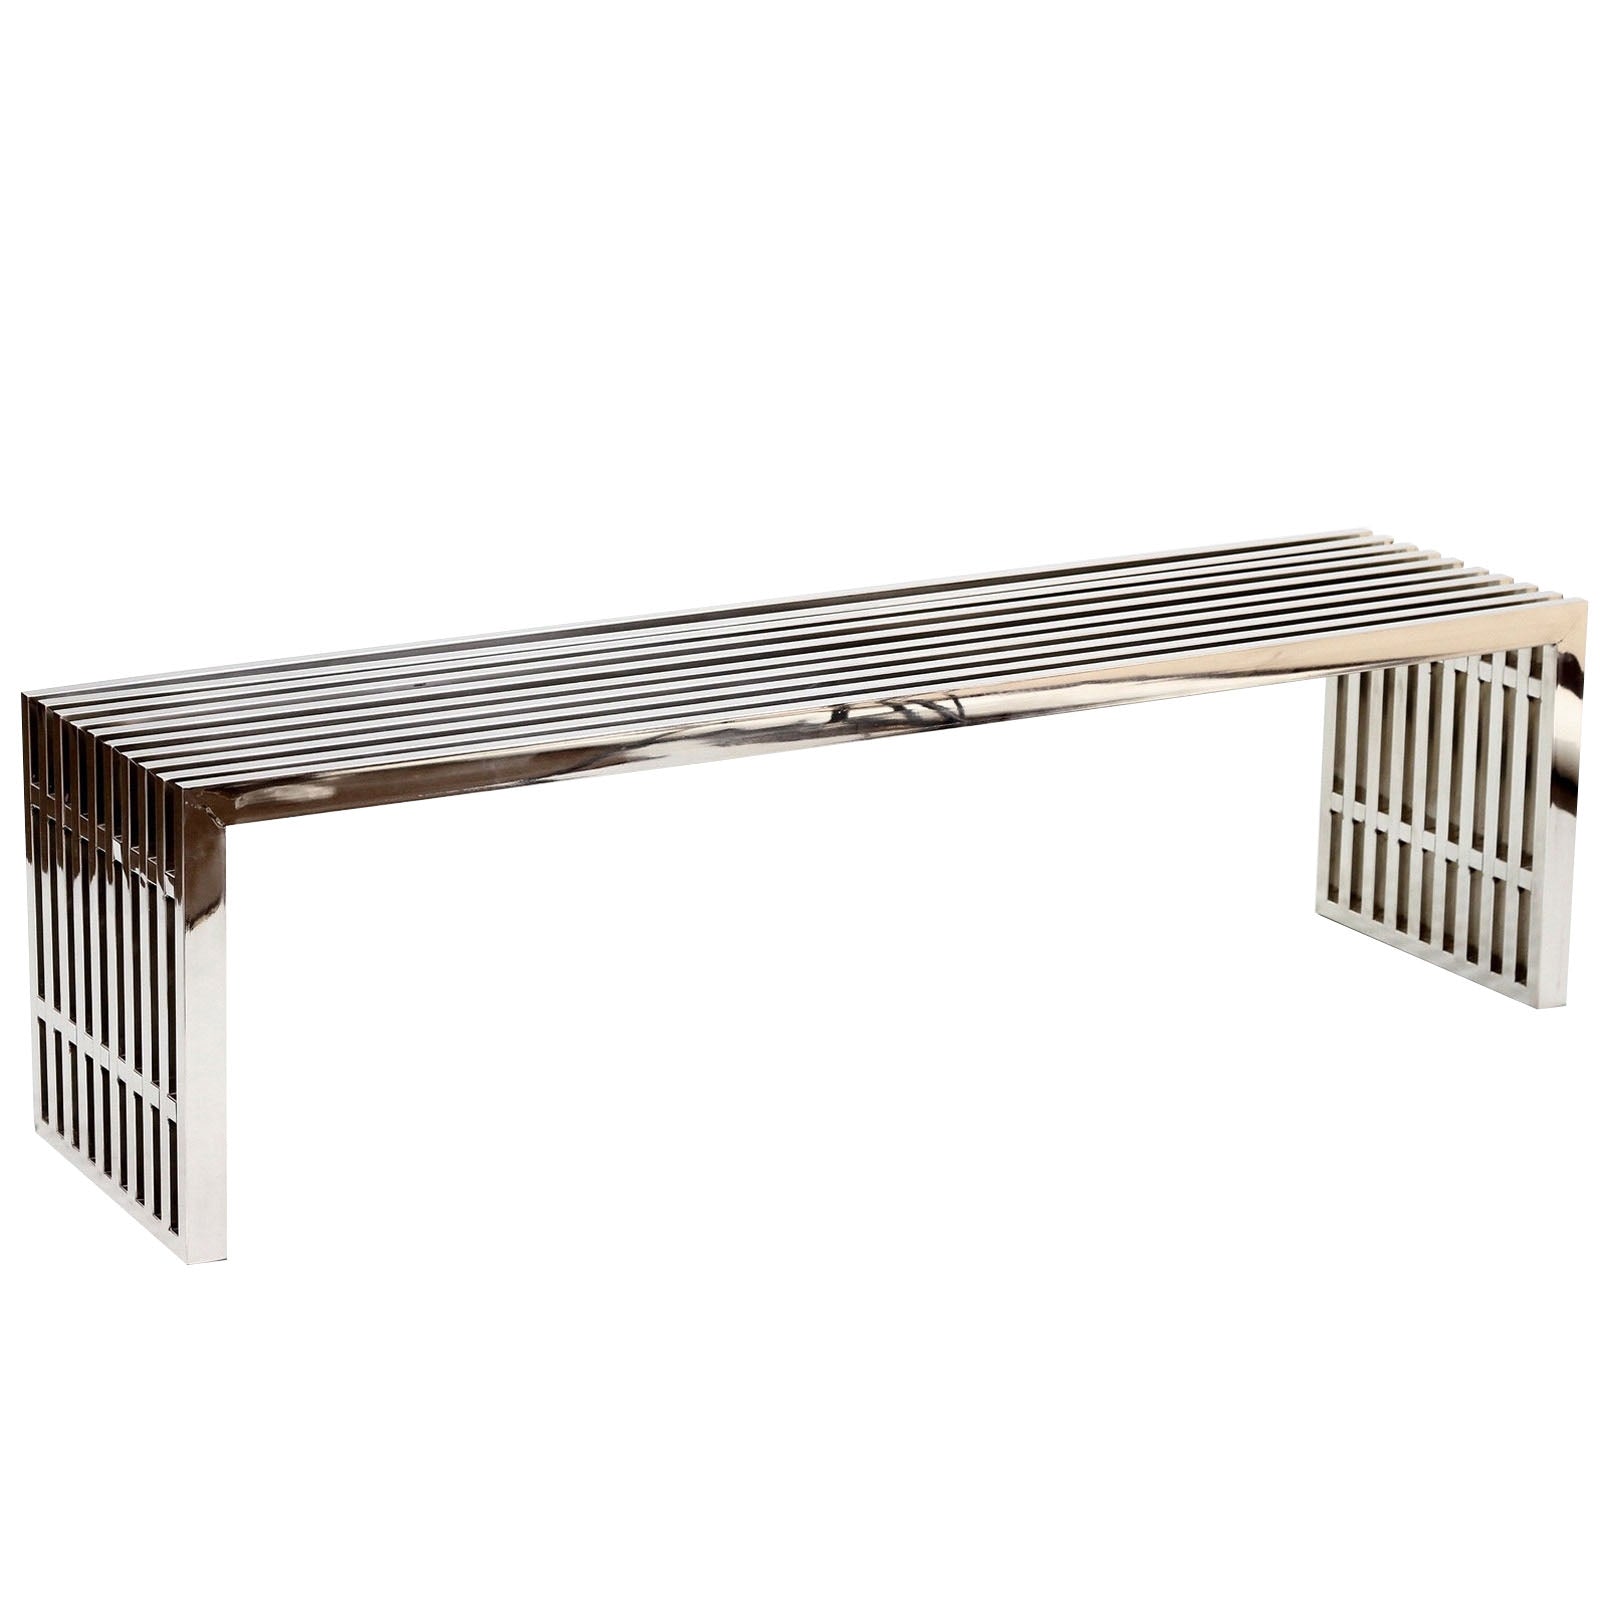 Gridiron Large Stainless Steel Bench - East Shore Modern Home Furnishings